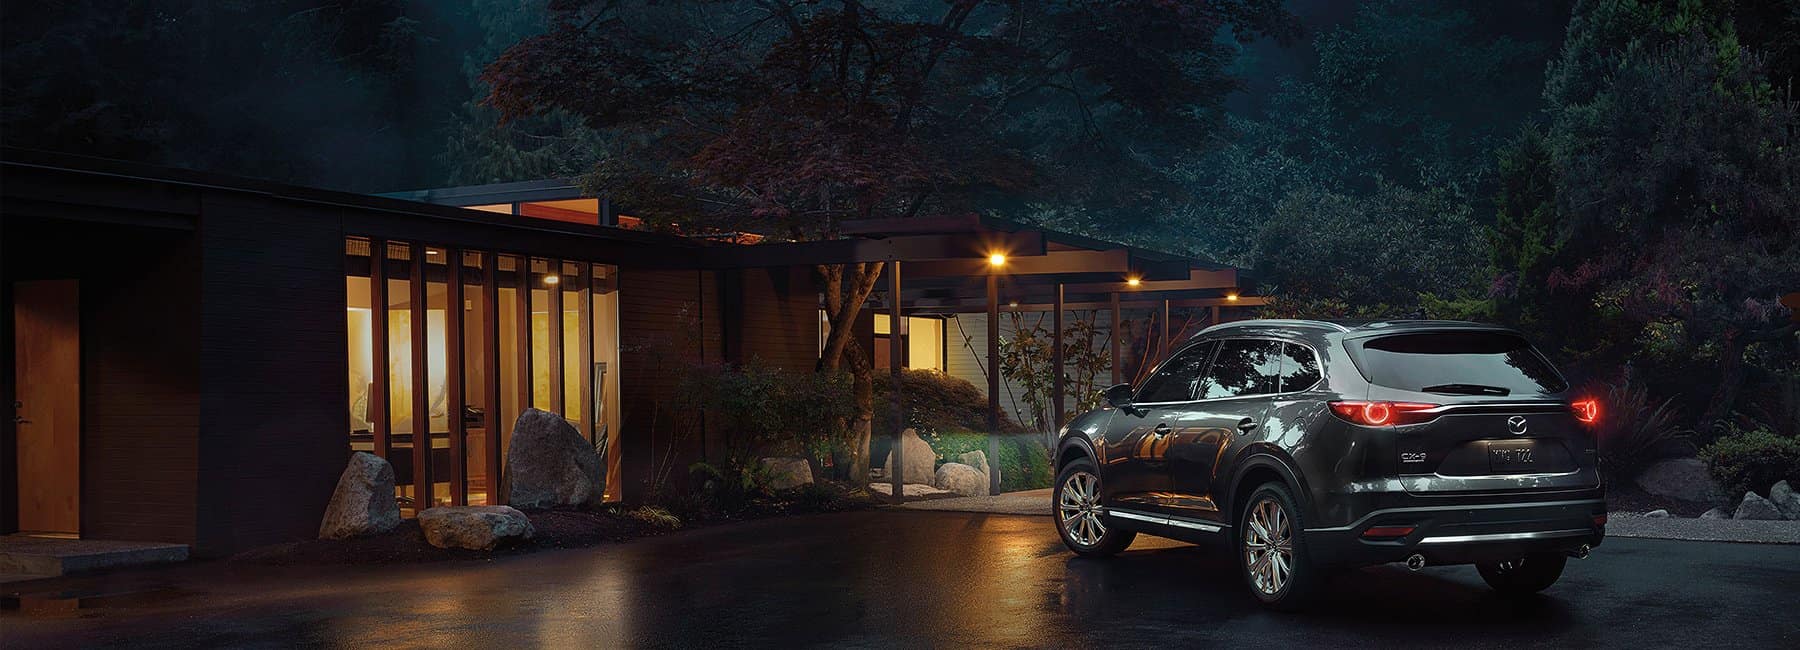 2022 Mazda CX-9 SUV-rear-3qview-parked-nighttime-modern house-forest-silver